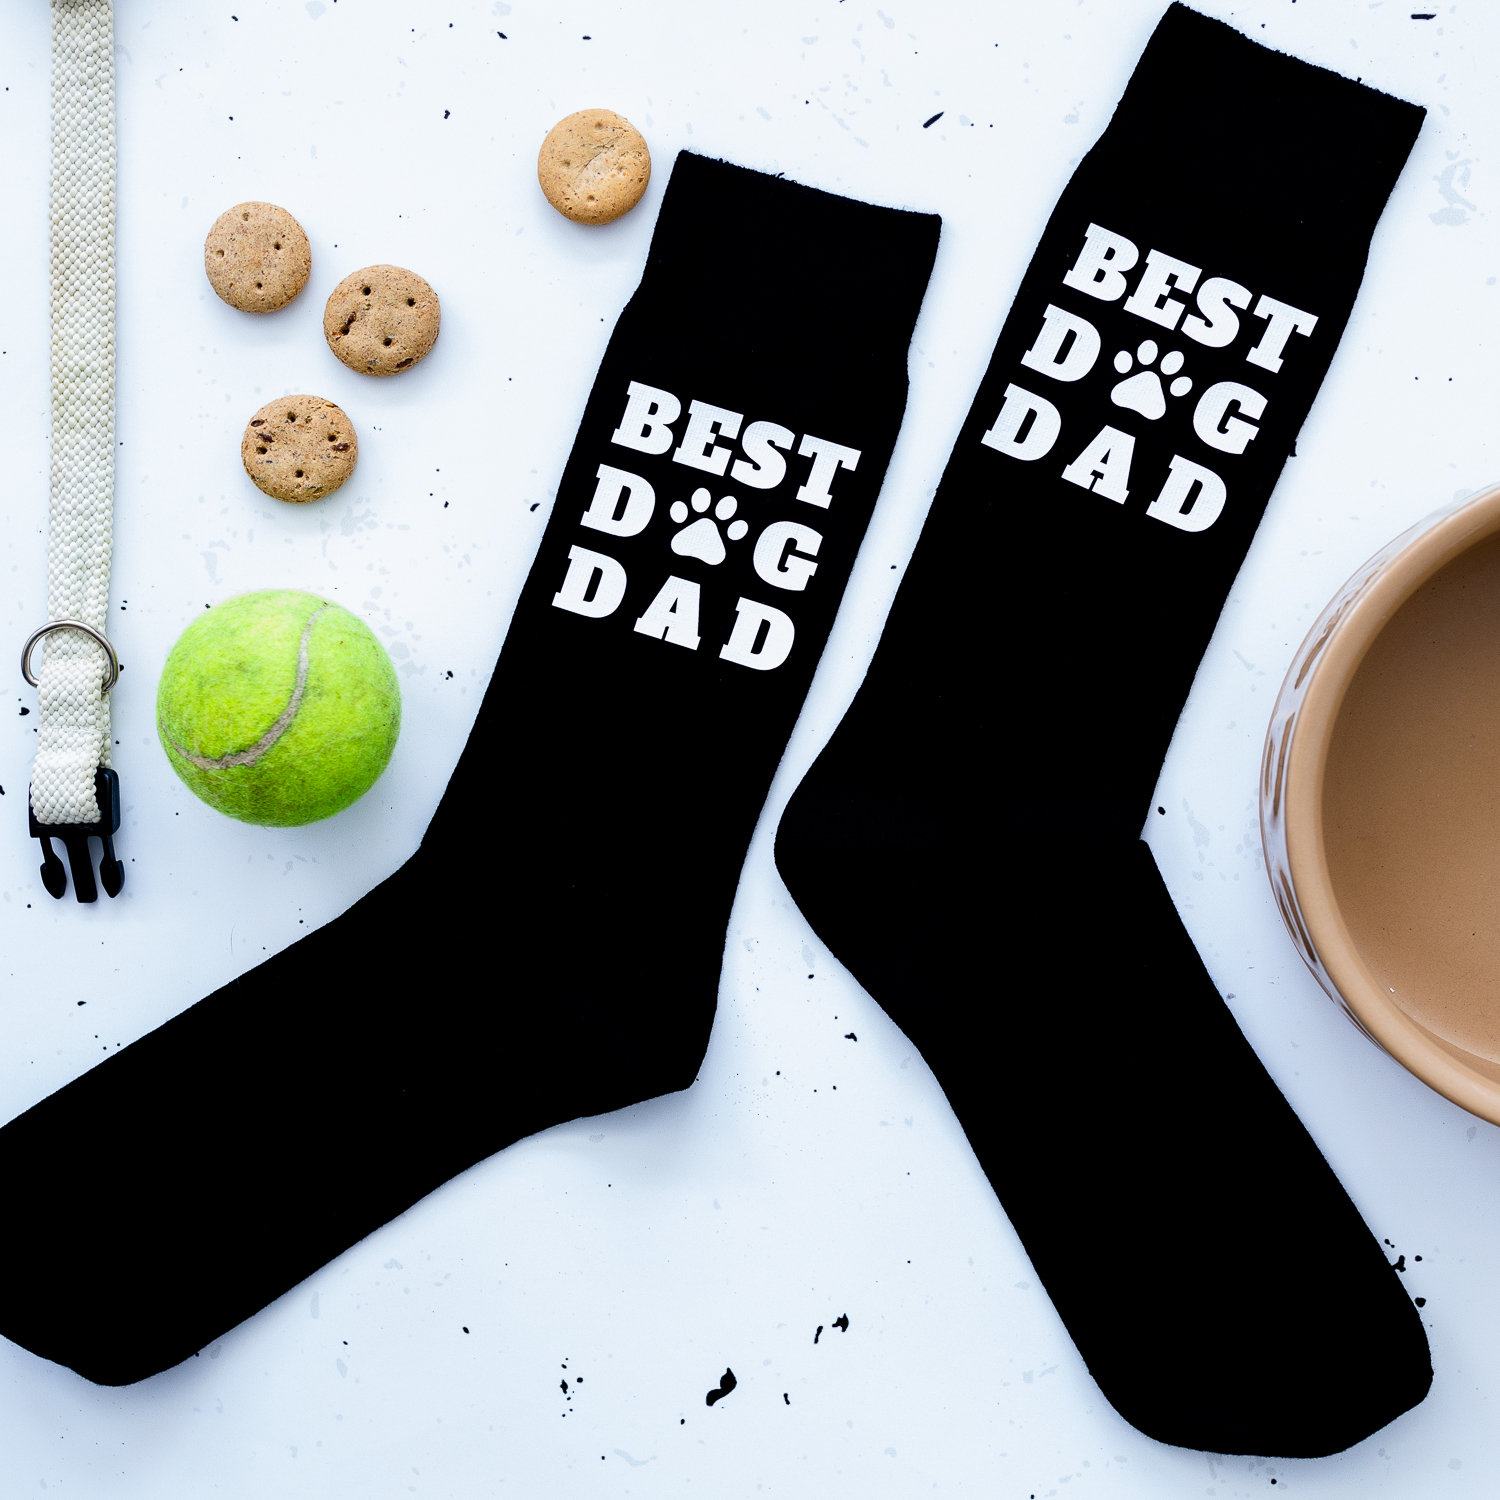 Best Dog Dad Socks, Fathers Day Gift, Gift For Dad, Dog Owner